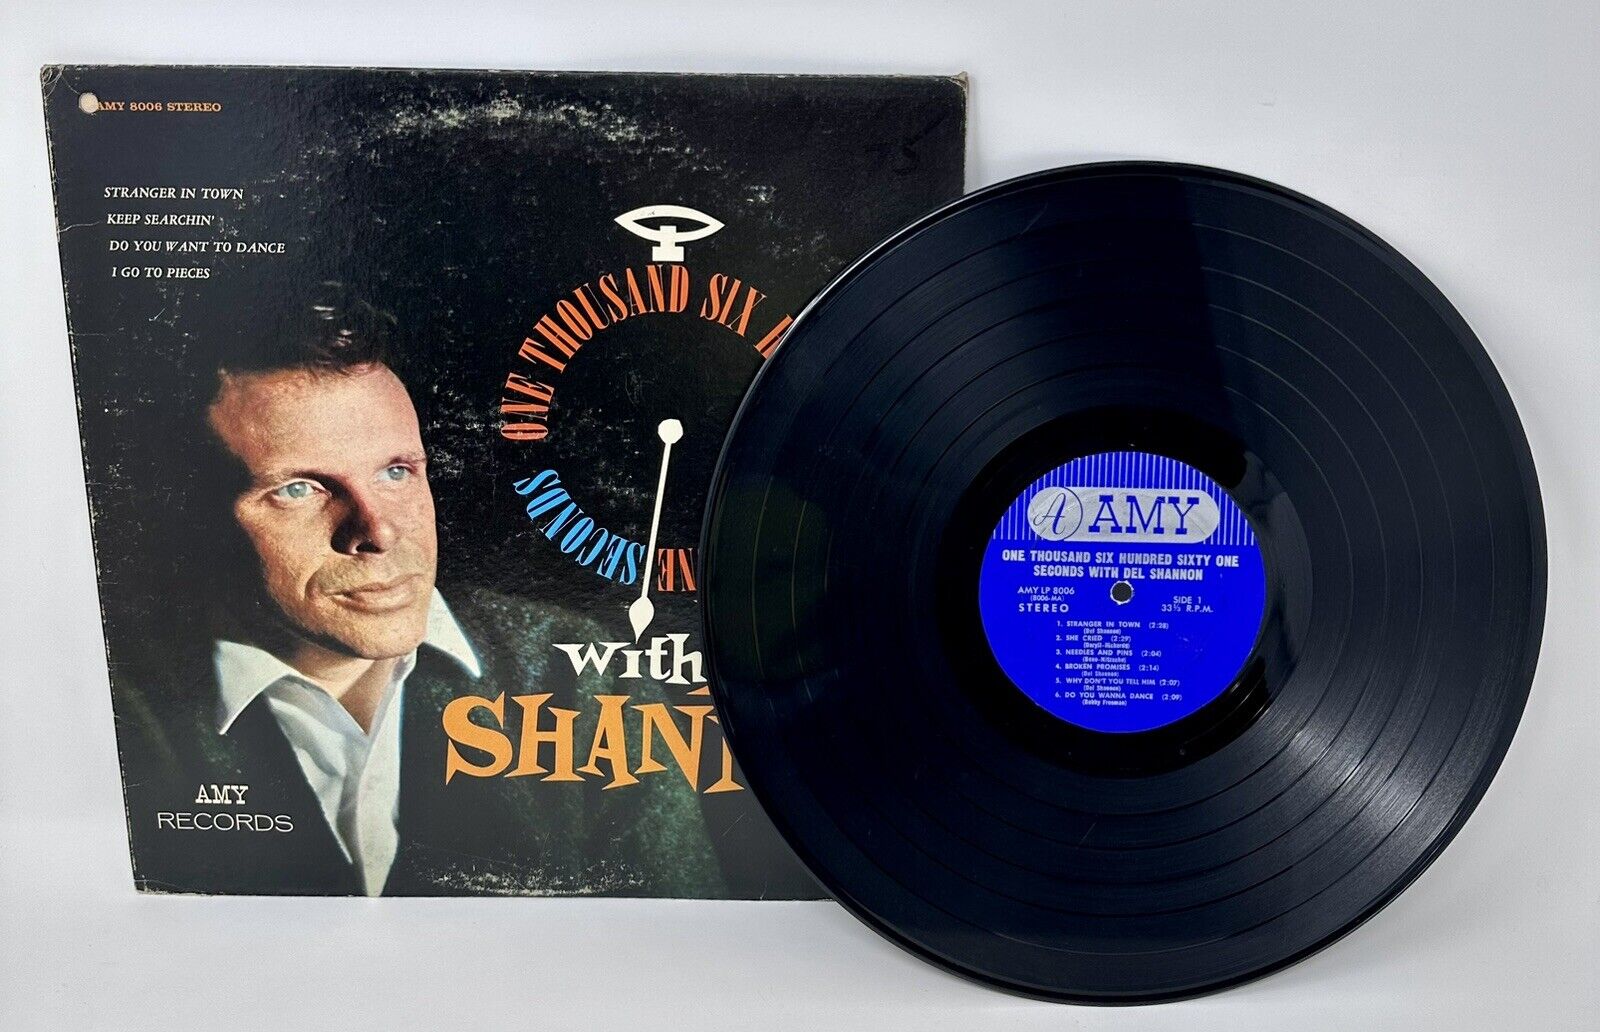 Del Shannon LP One Thousand Six Hundred Sixty One Seconds Amy 1965 Vinyl Record